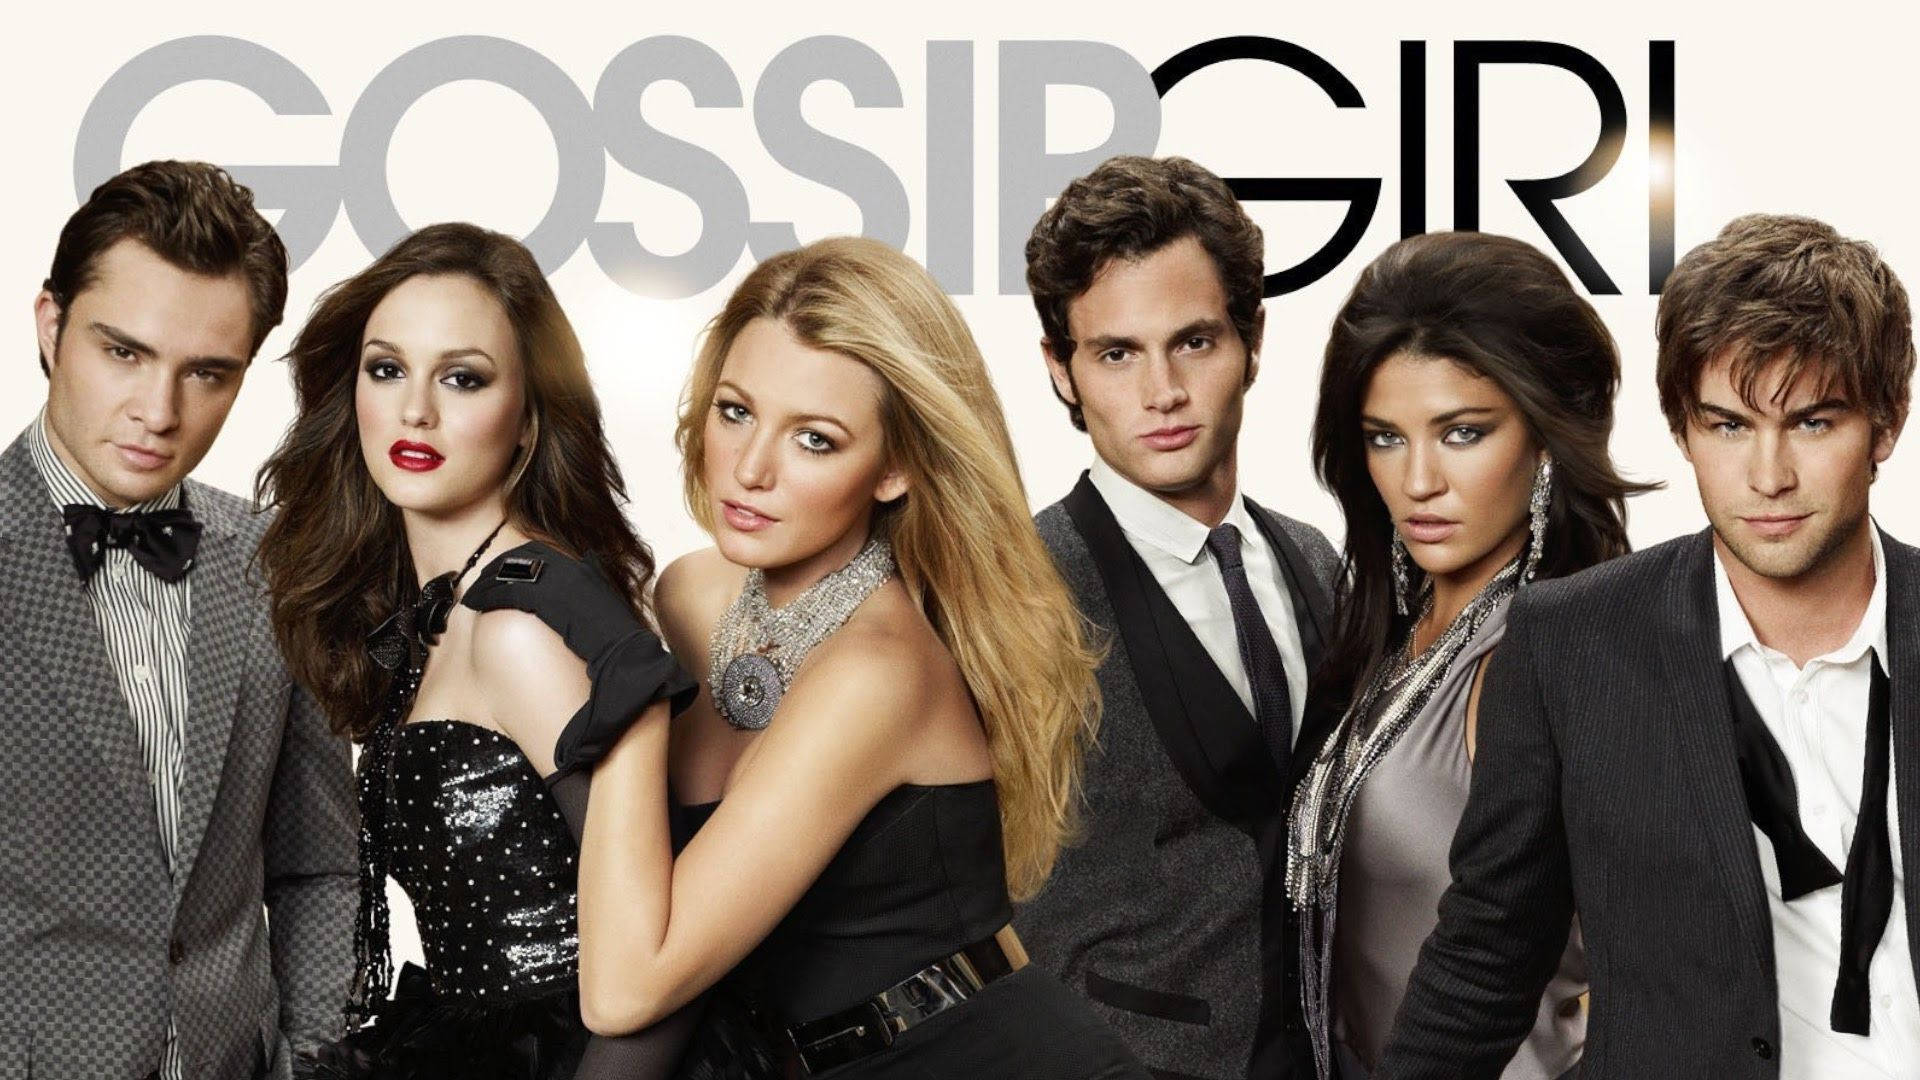 Gossip Girl Television Series Cover Background